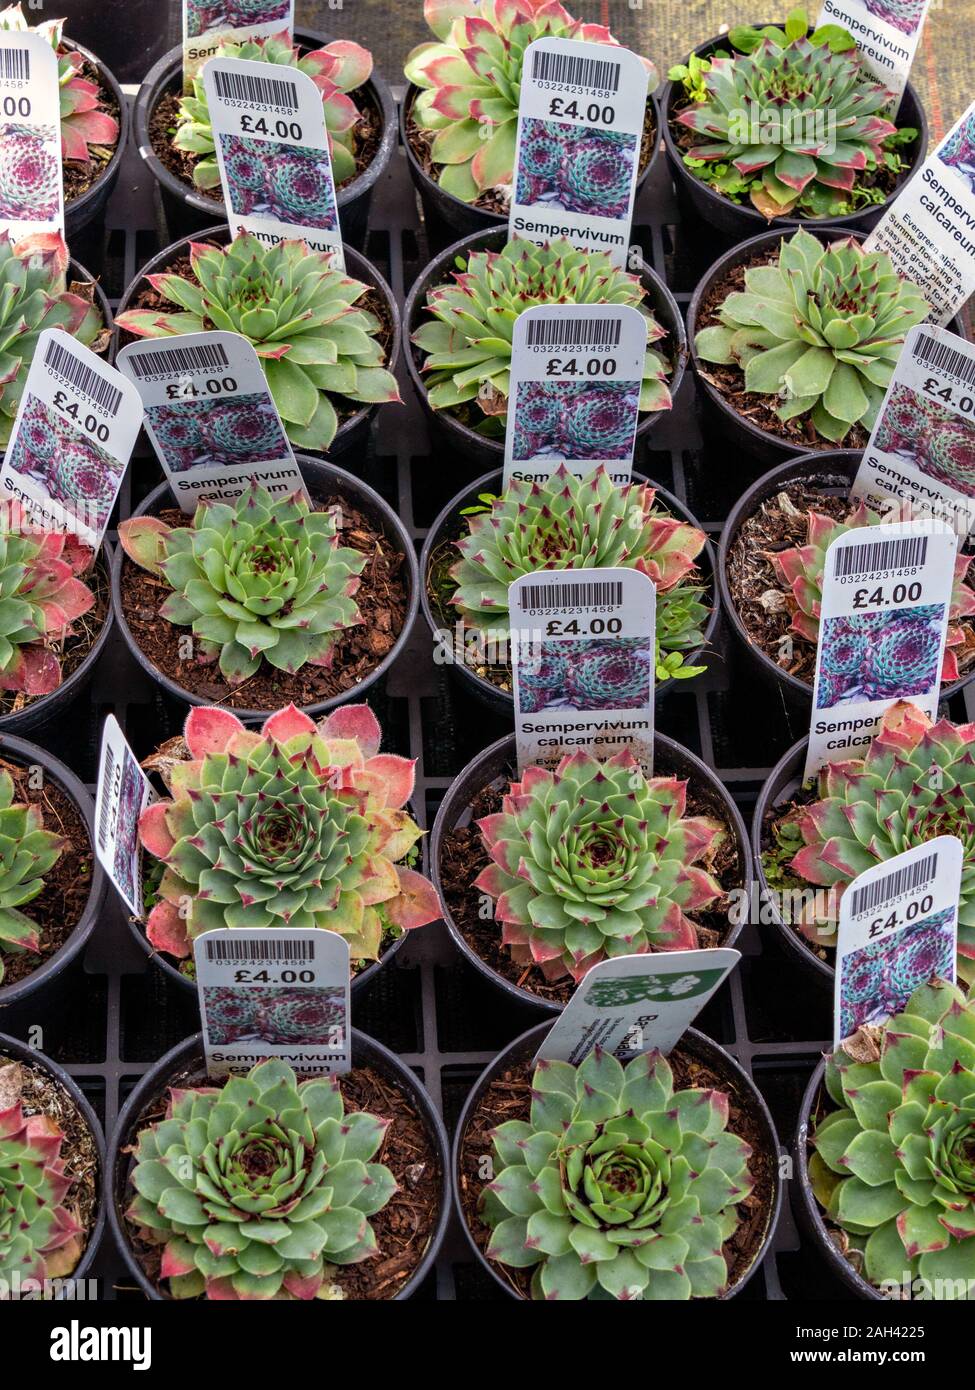 Rows of Sempervivum calcareum houseleek succulent alpine cactus plants growing in small pots with tags / labels on sale in UK garden centre. Stock Photo